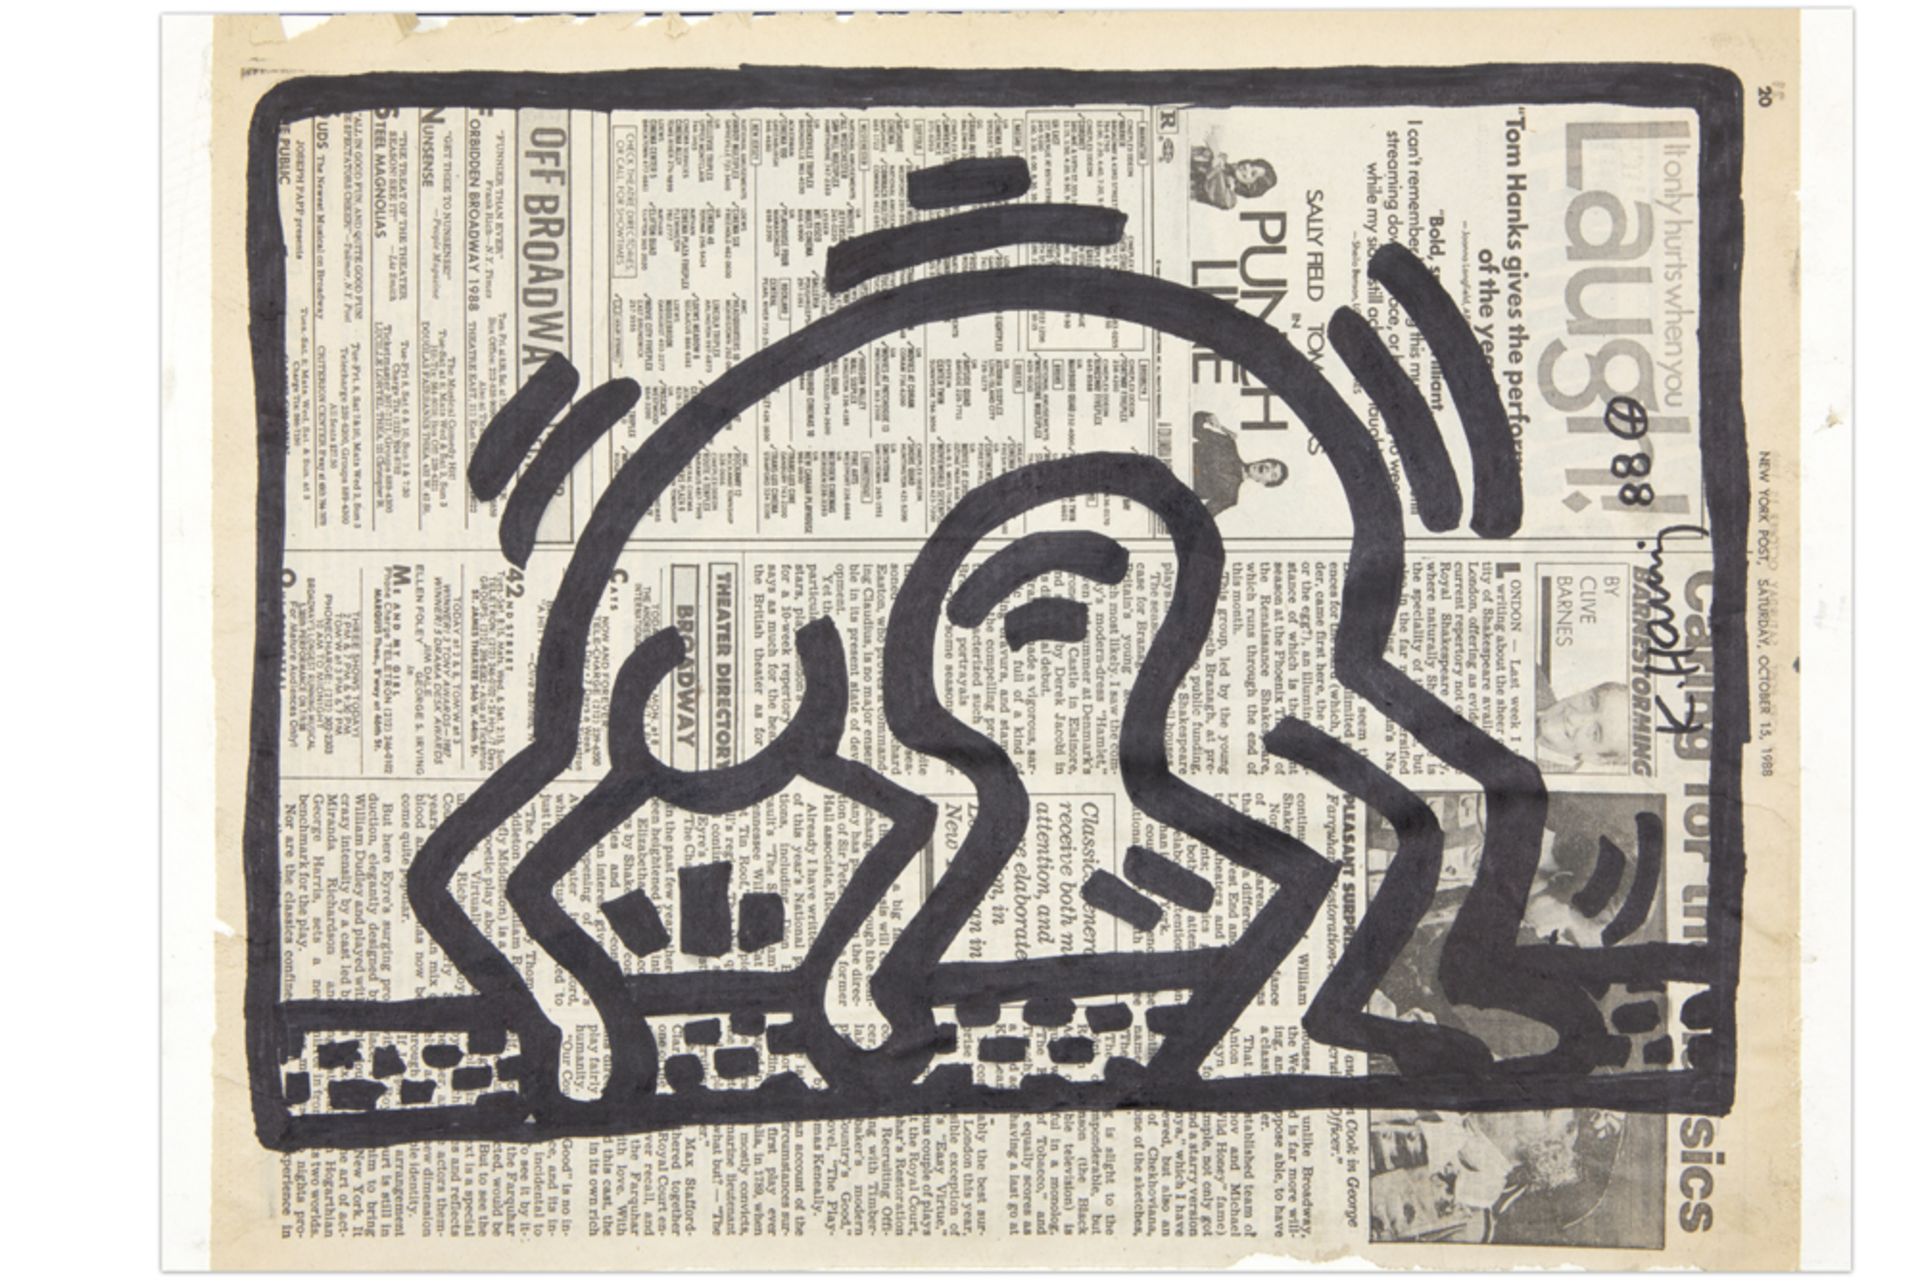 Keith Haring signed and (19)88 dated "Dancing Figure" marker drawing on a New York Post newspaper